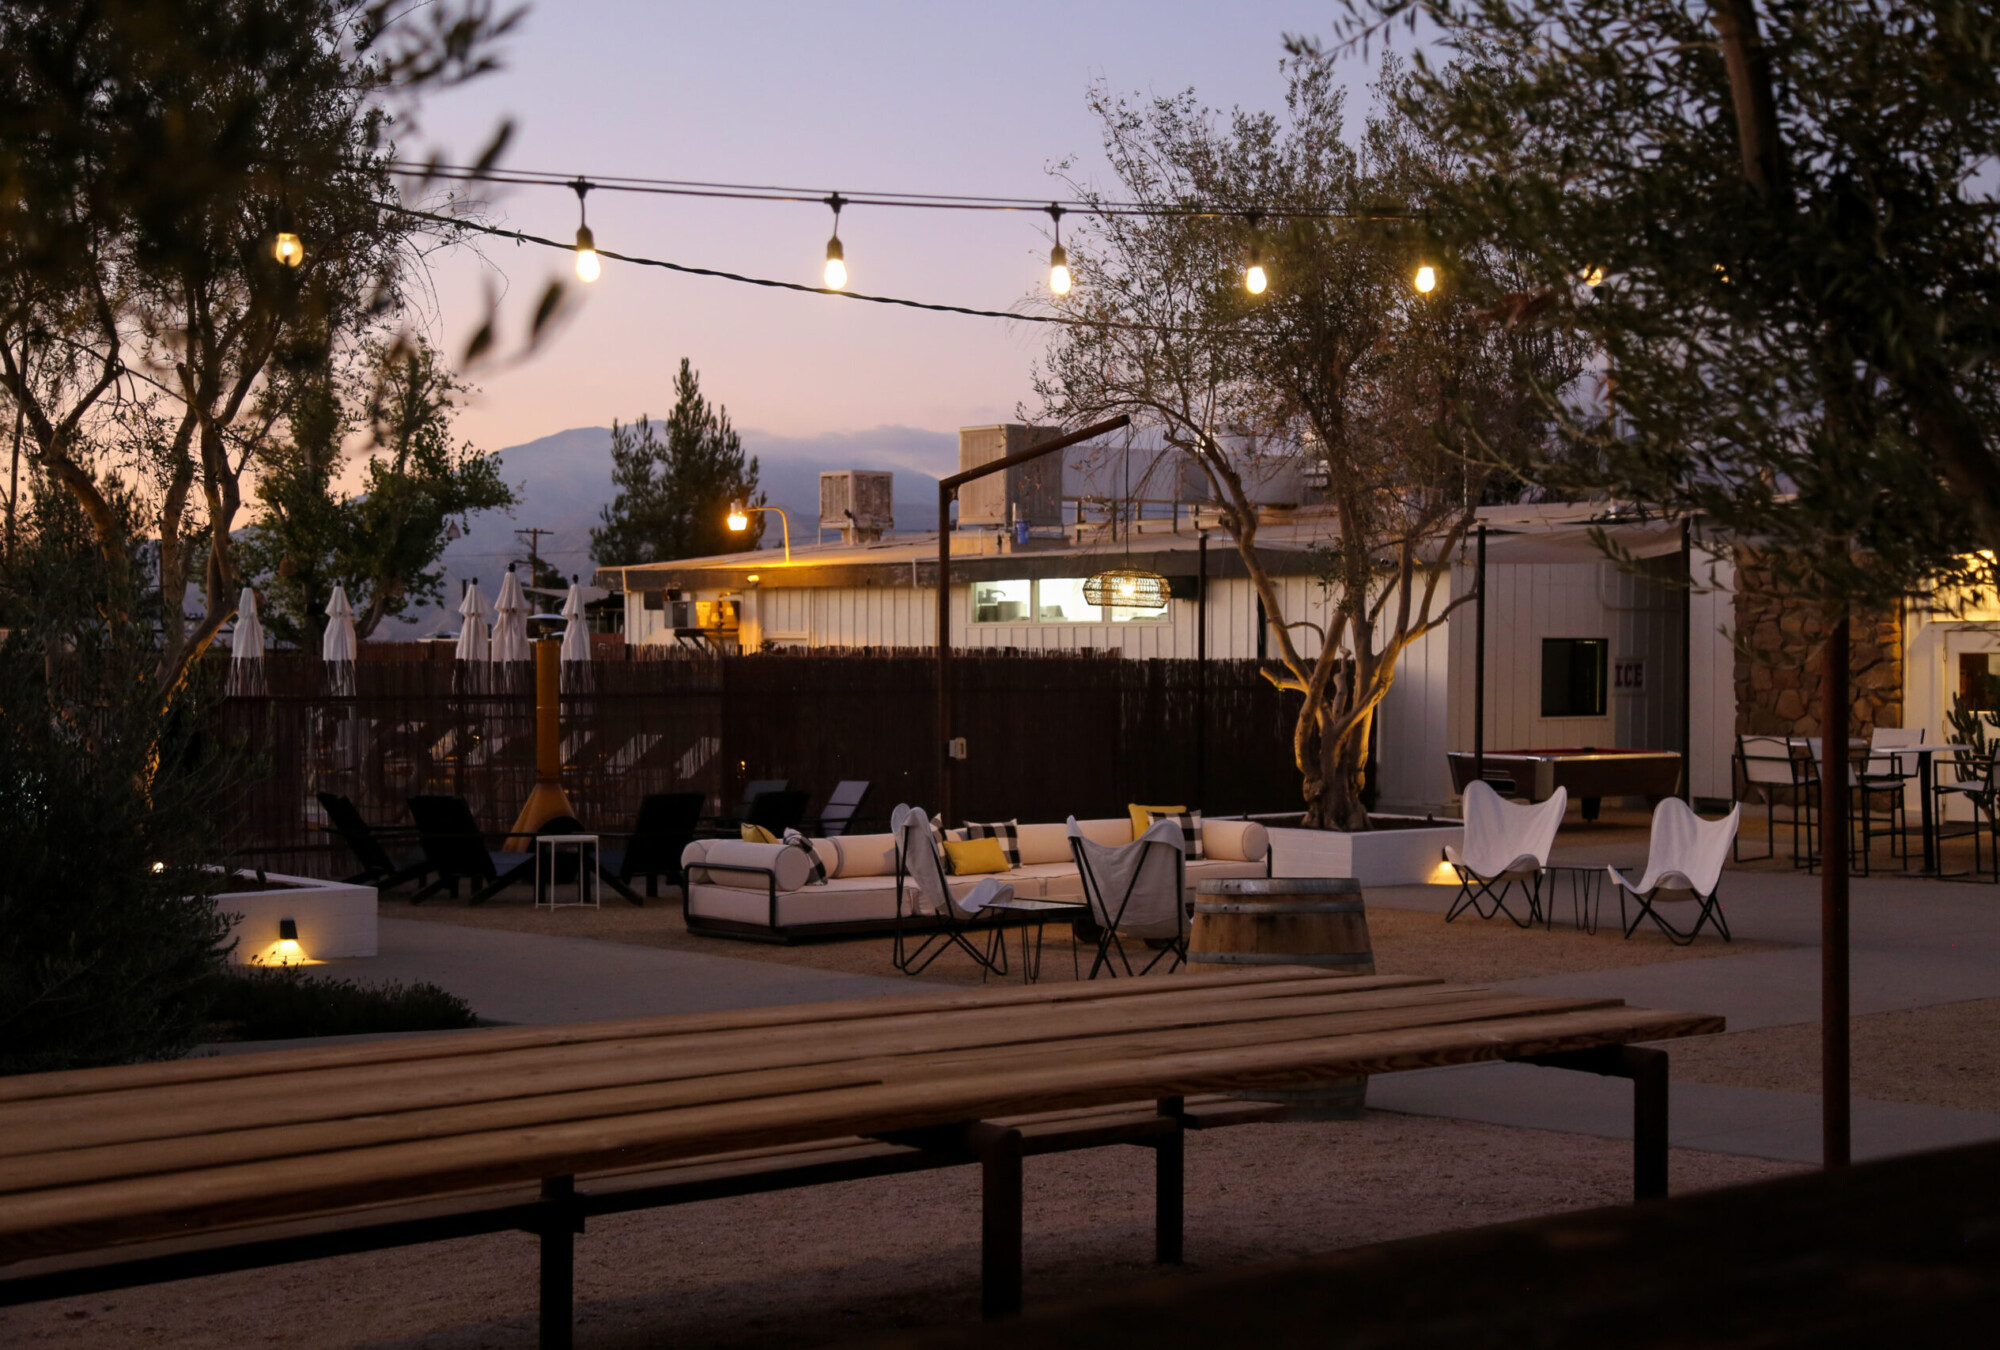 Courtyard view at dusk of the Cuyama Buckhorn lodging in New Cuyama, California.